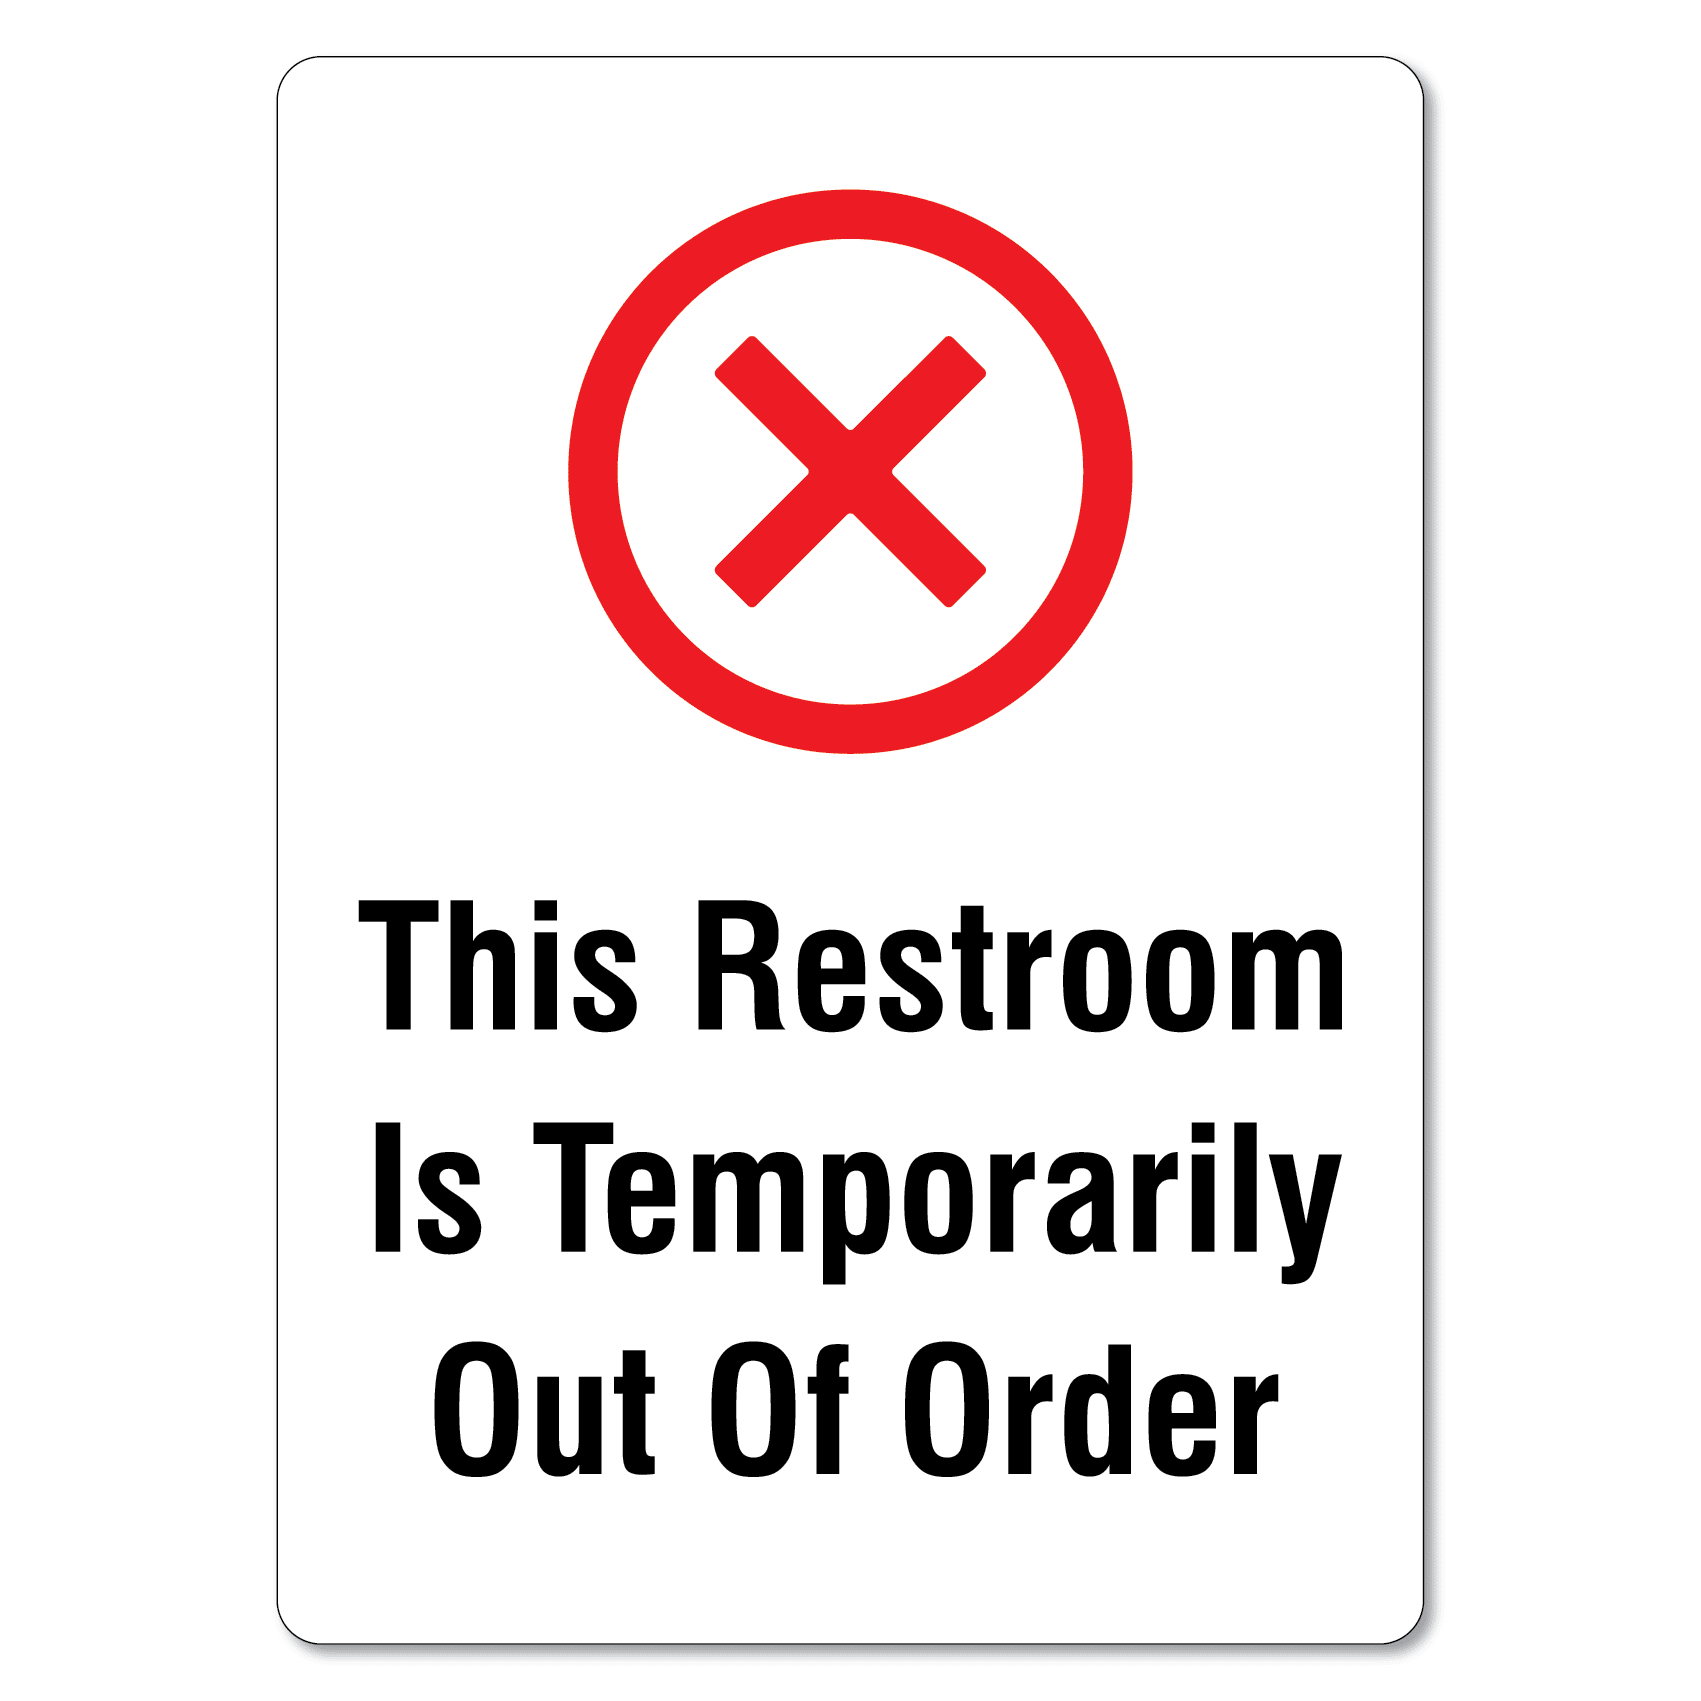 This Restroom Is Temporarily Out Of Order Sign The Signmaker